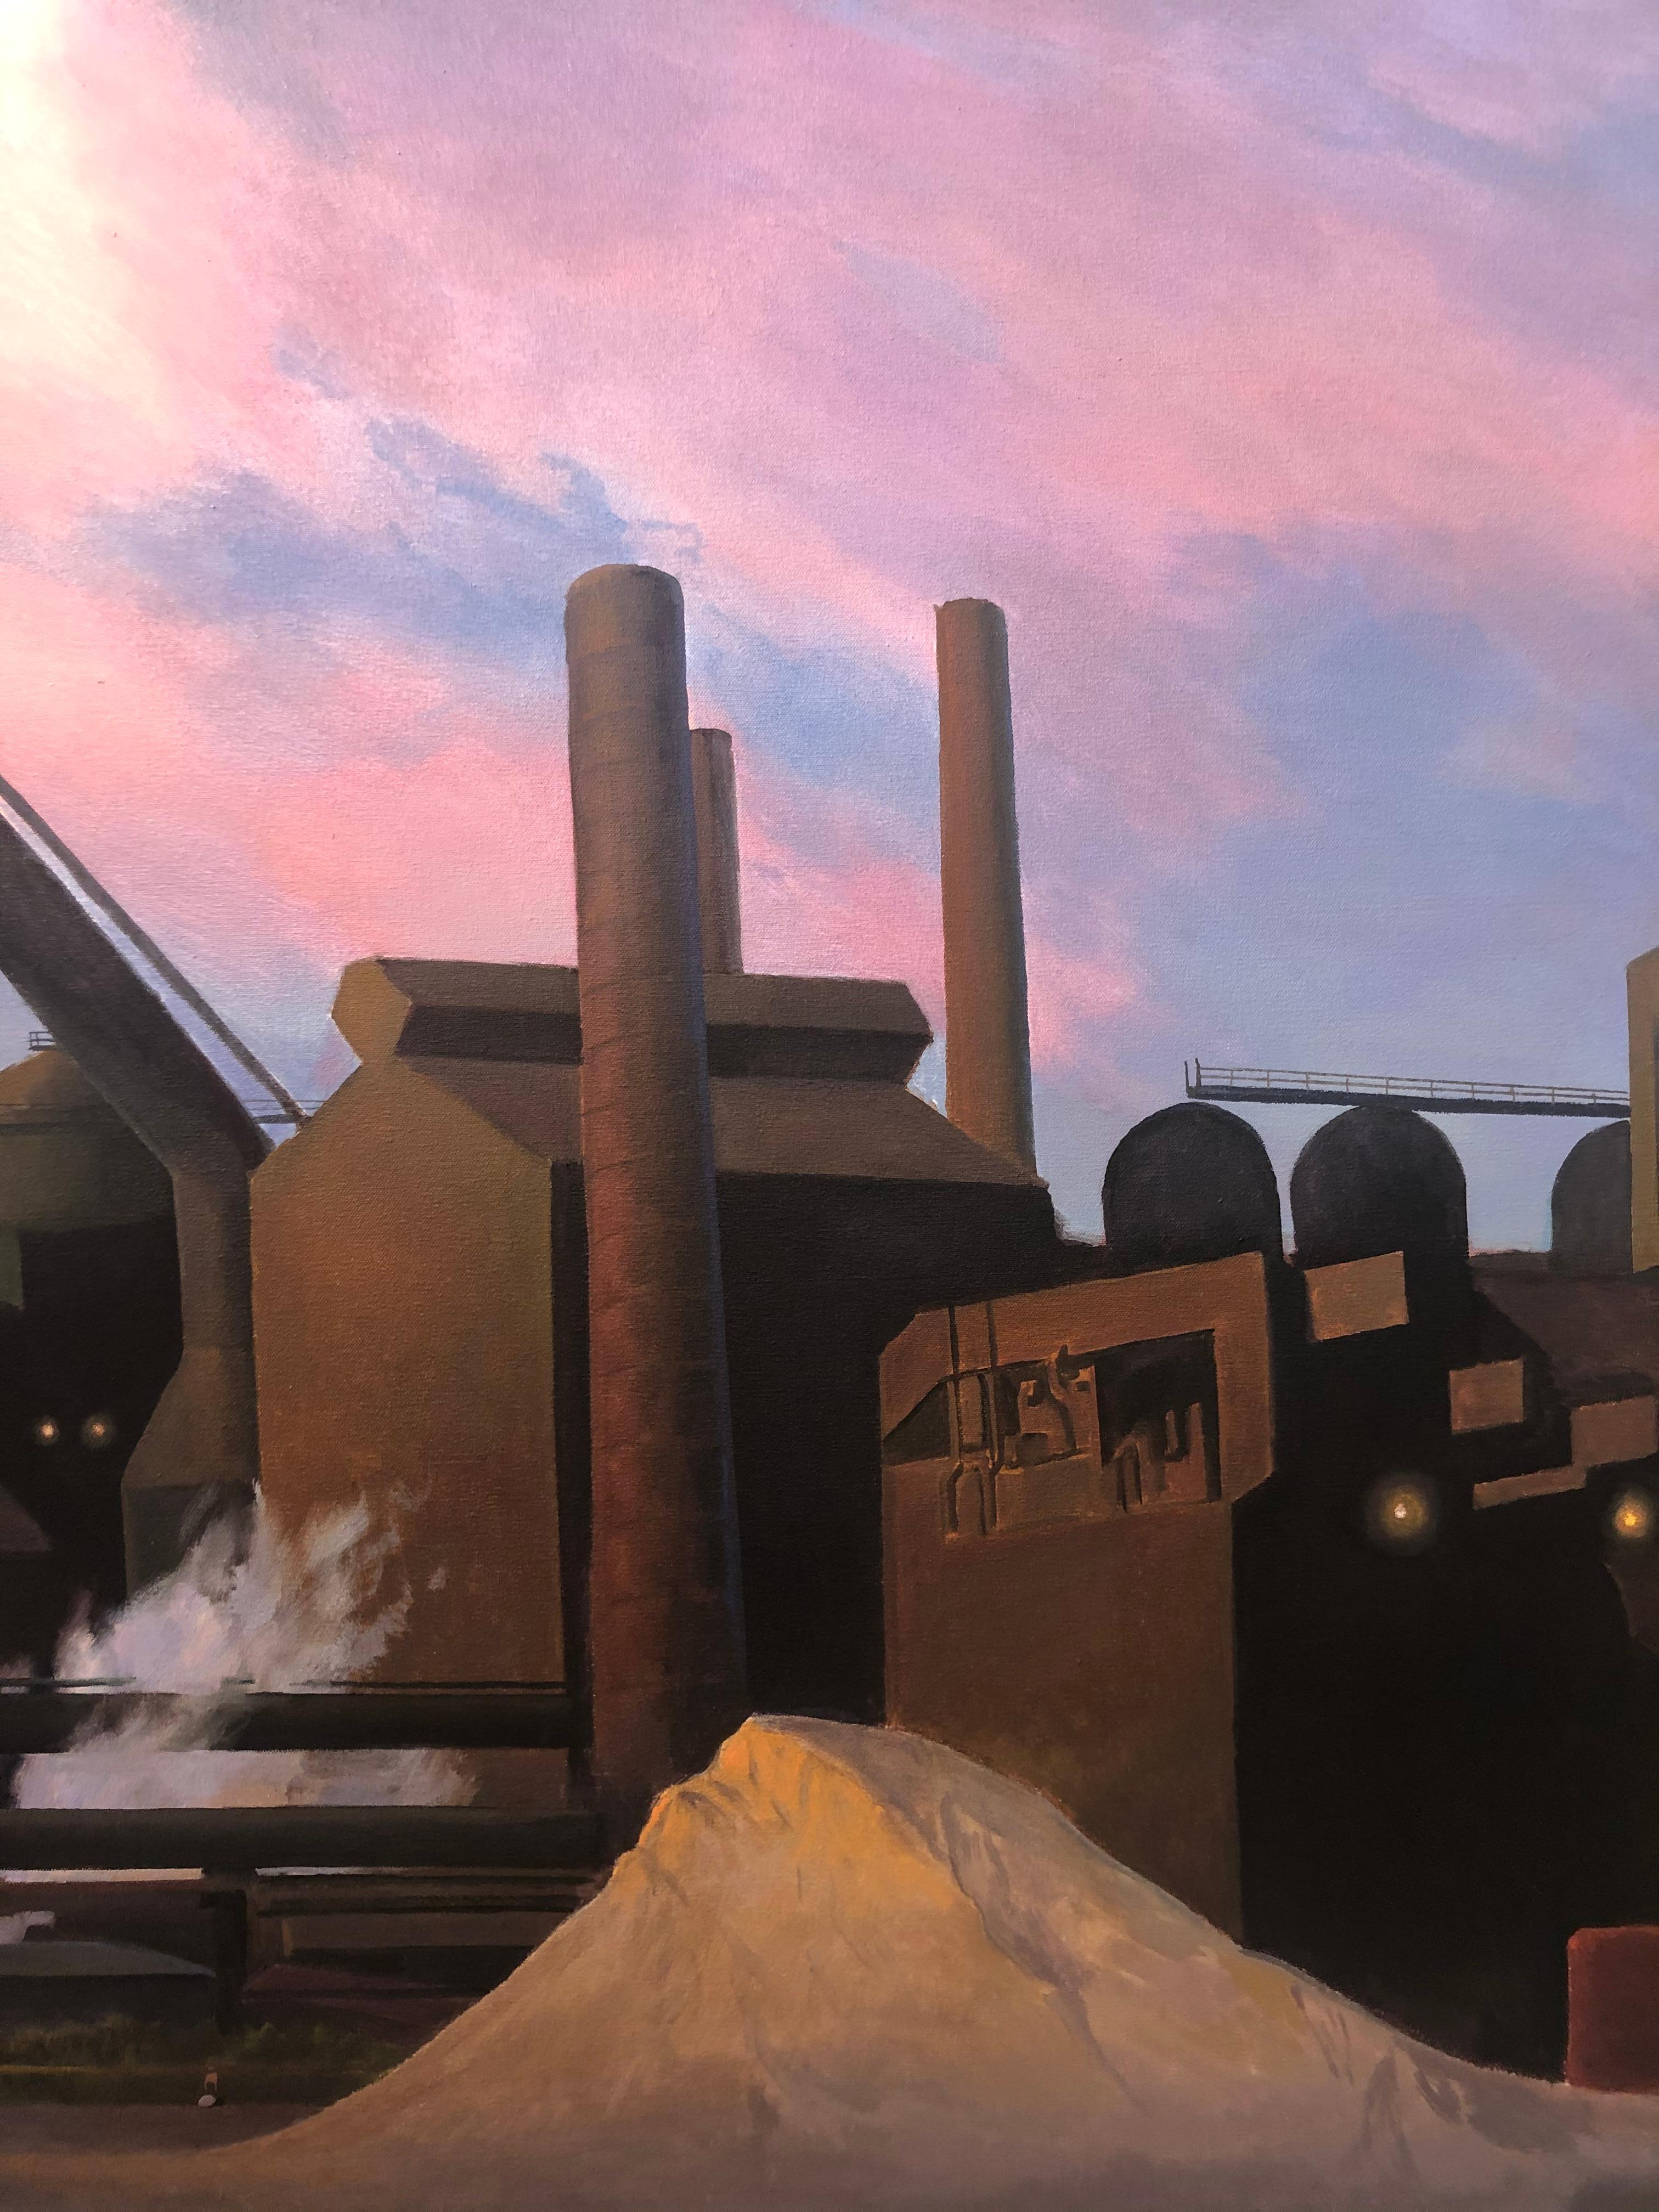 Twilight in the Wilderness, Urban Industrial Landscape, Contemporary Realism - Painting by Art Chartow